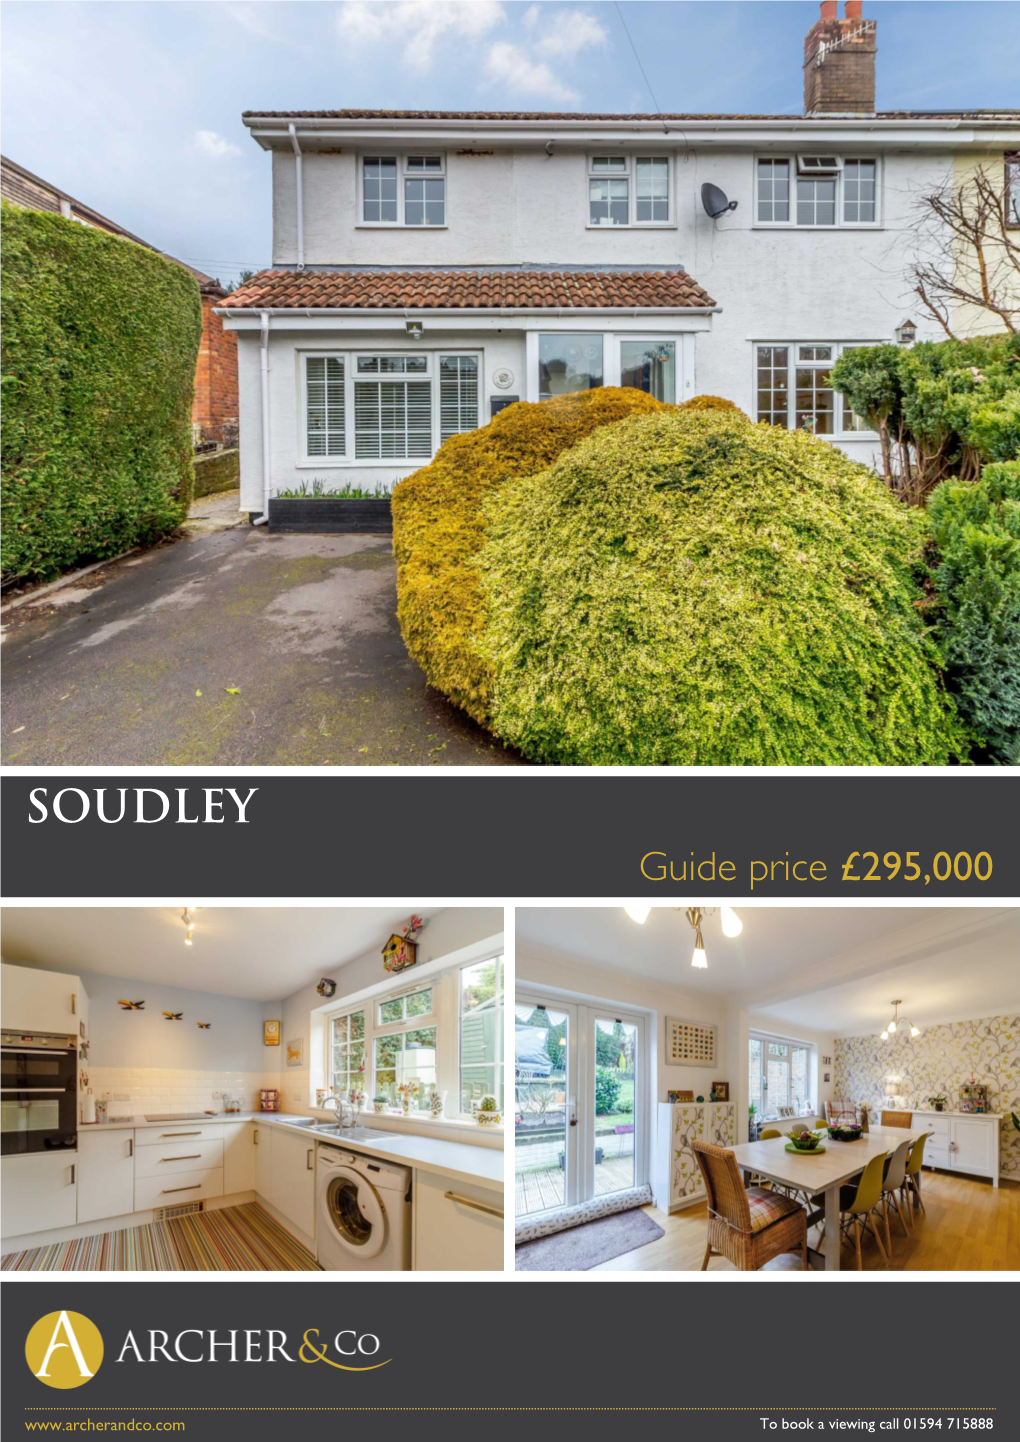 SOUDLEY Guide Price £295,000